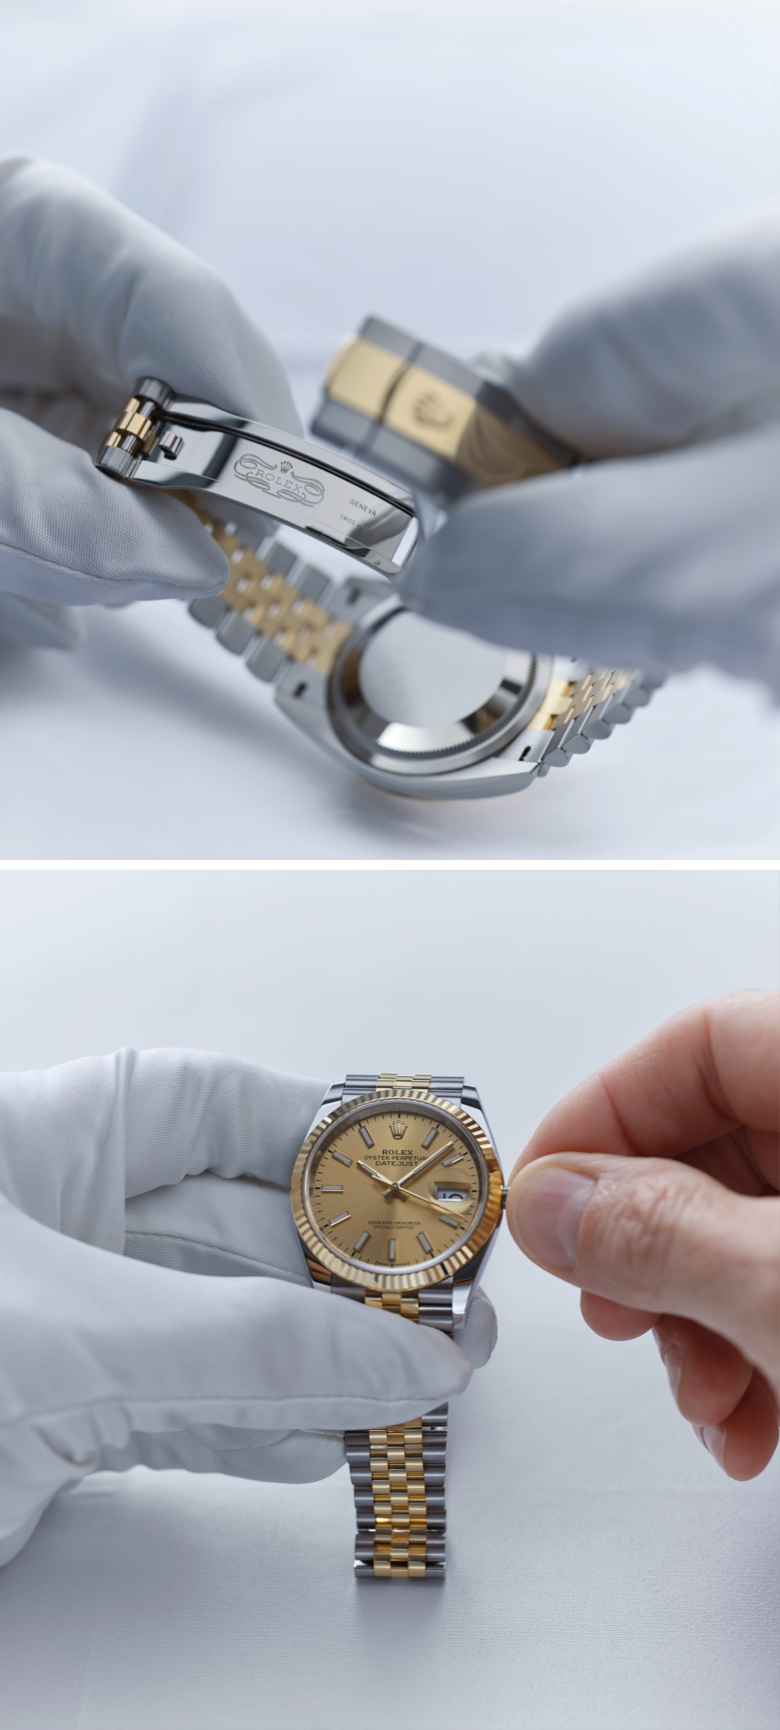 The final control being executed on the Rolex watch